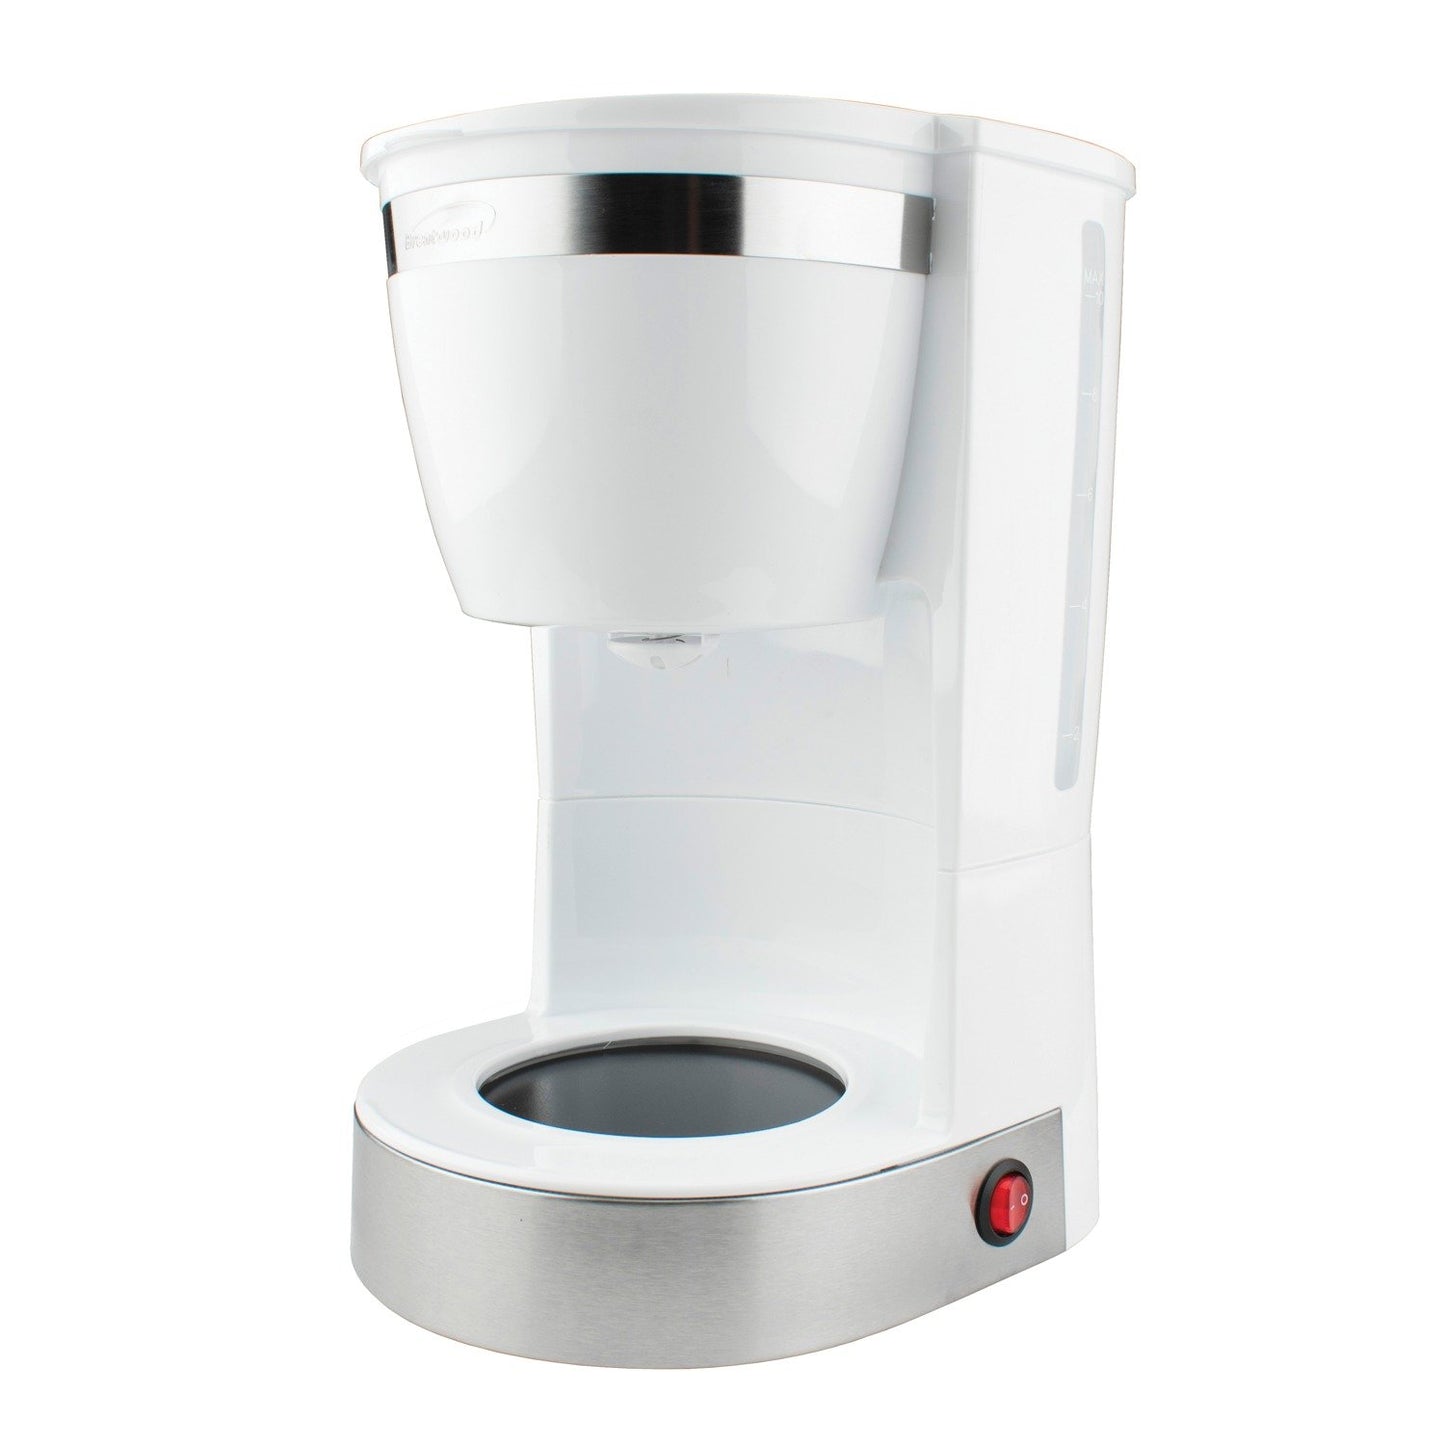 Brentwood Appl. TS-215W 12-Cup Coffee Maker (White)